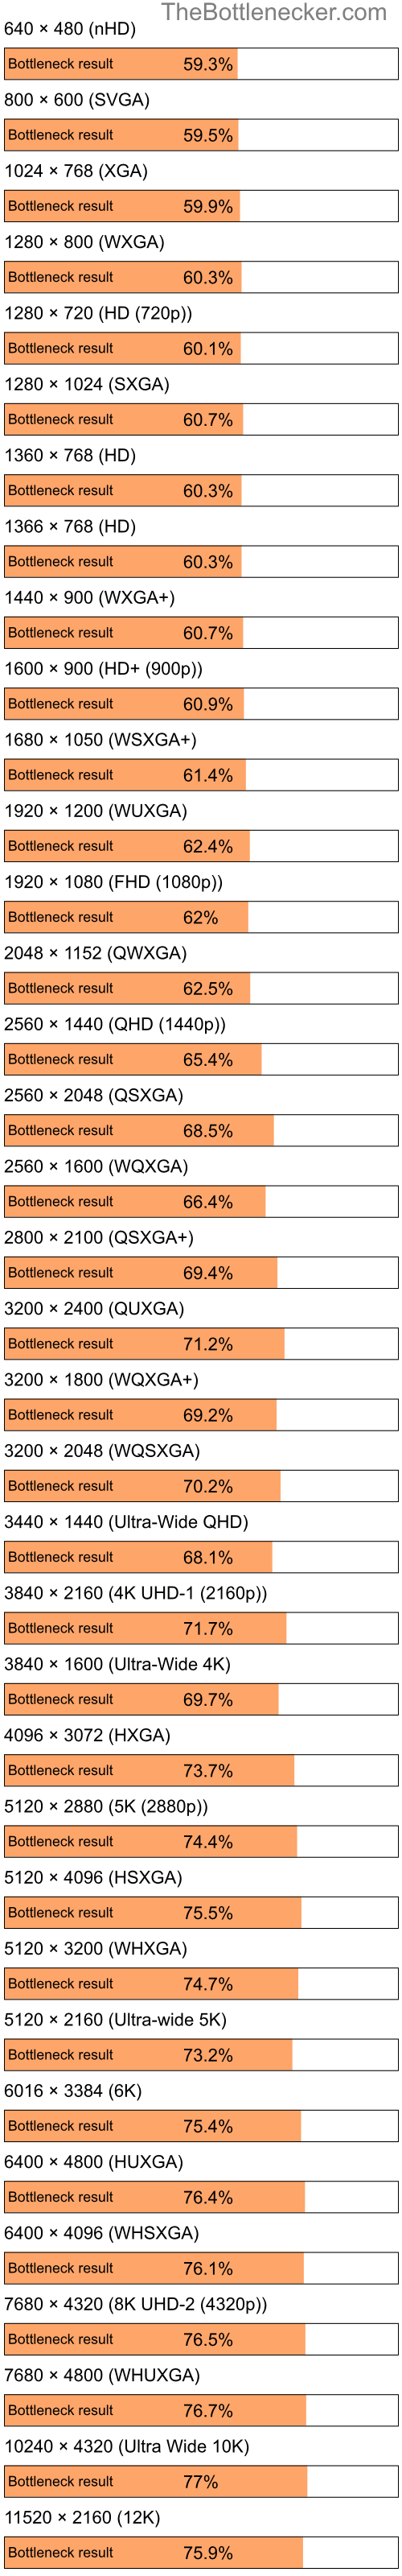 Bottleneck results by resolution for Intel Atom Z520 and NVIDIA GeForce 8600M GS in Processor Intense Tasks